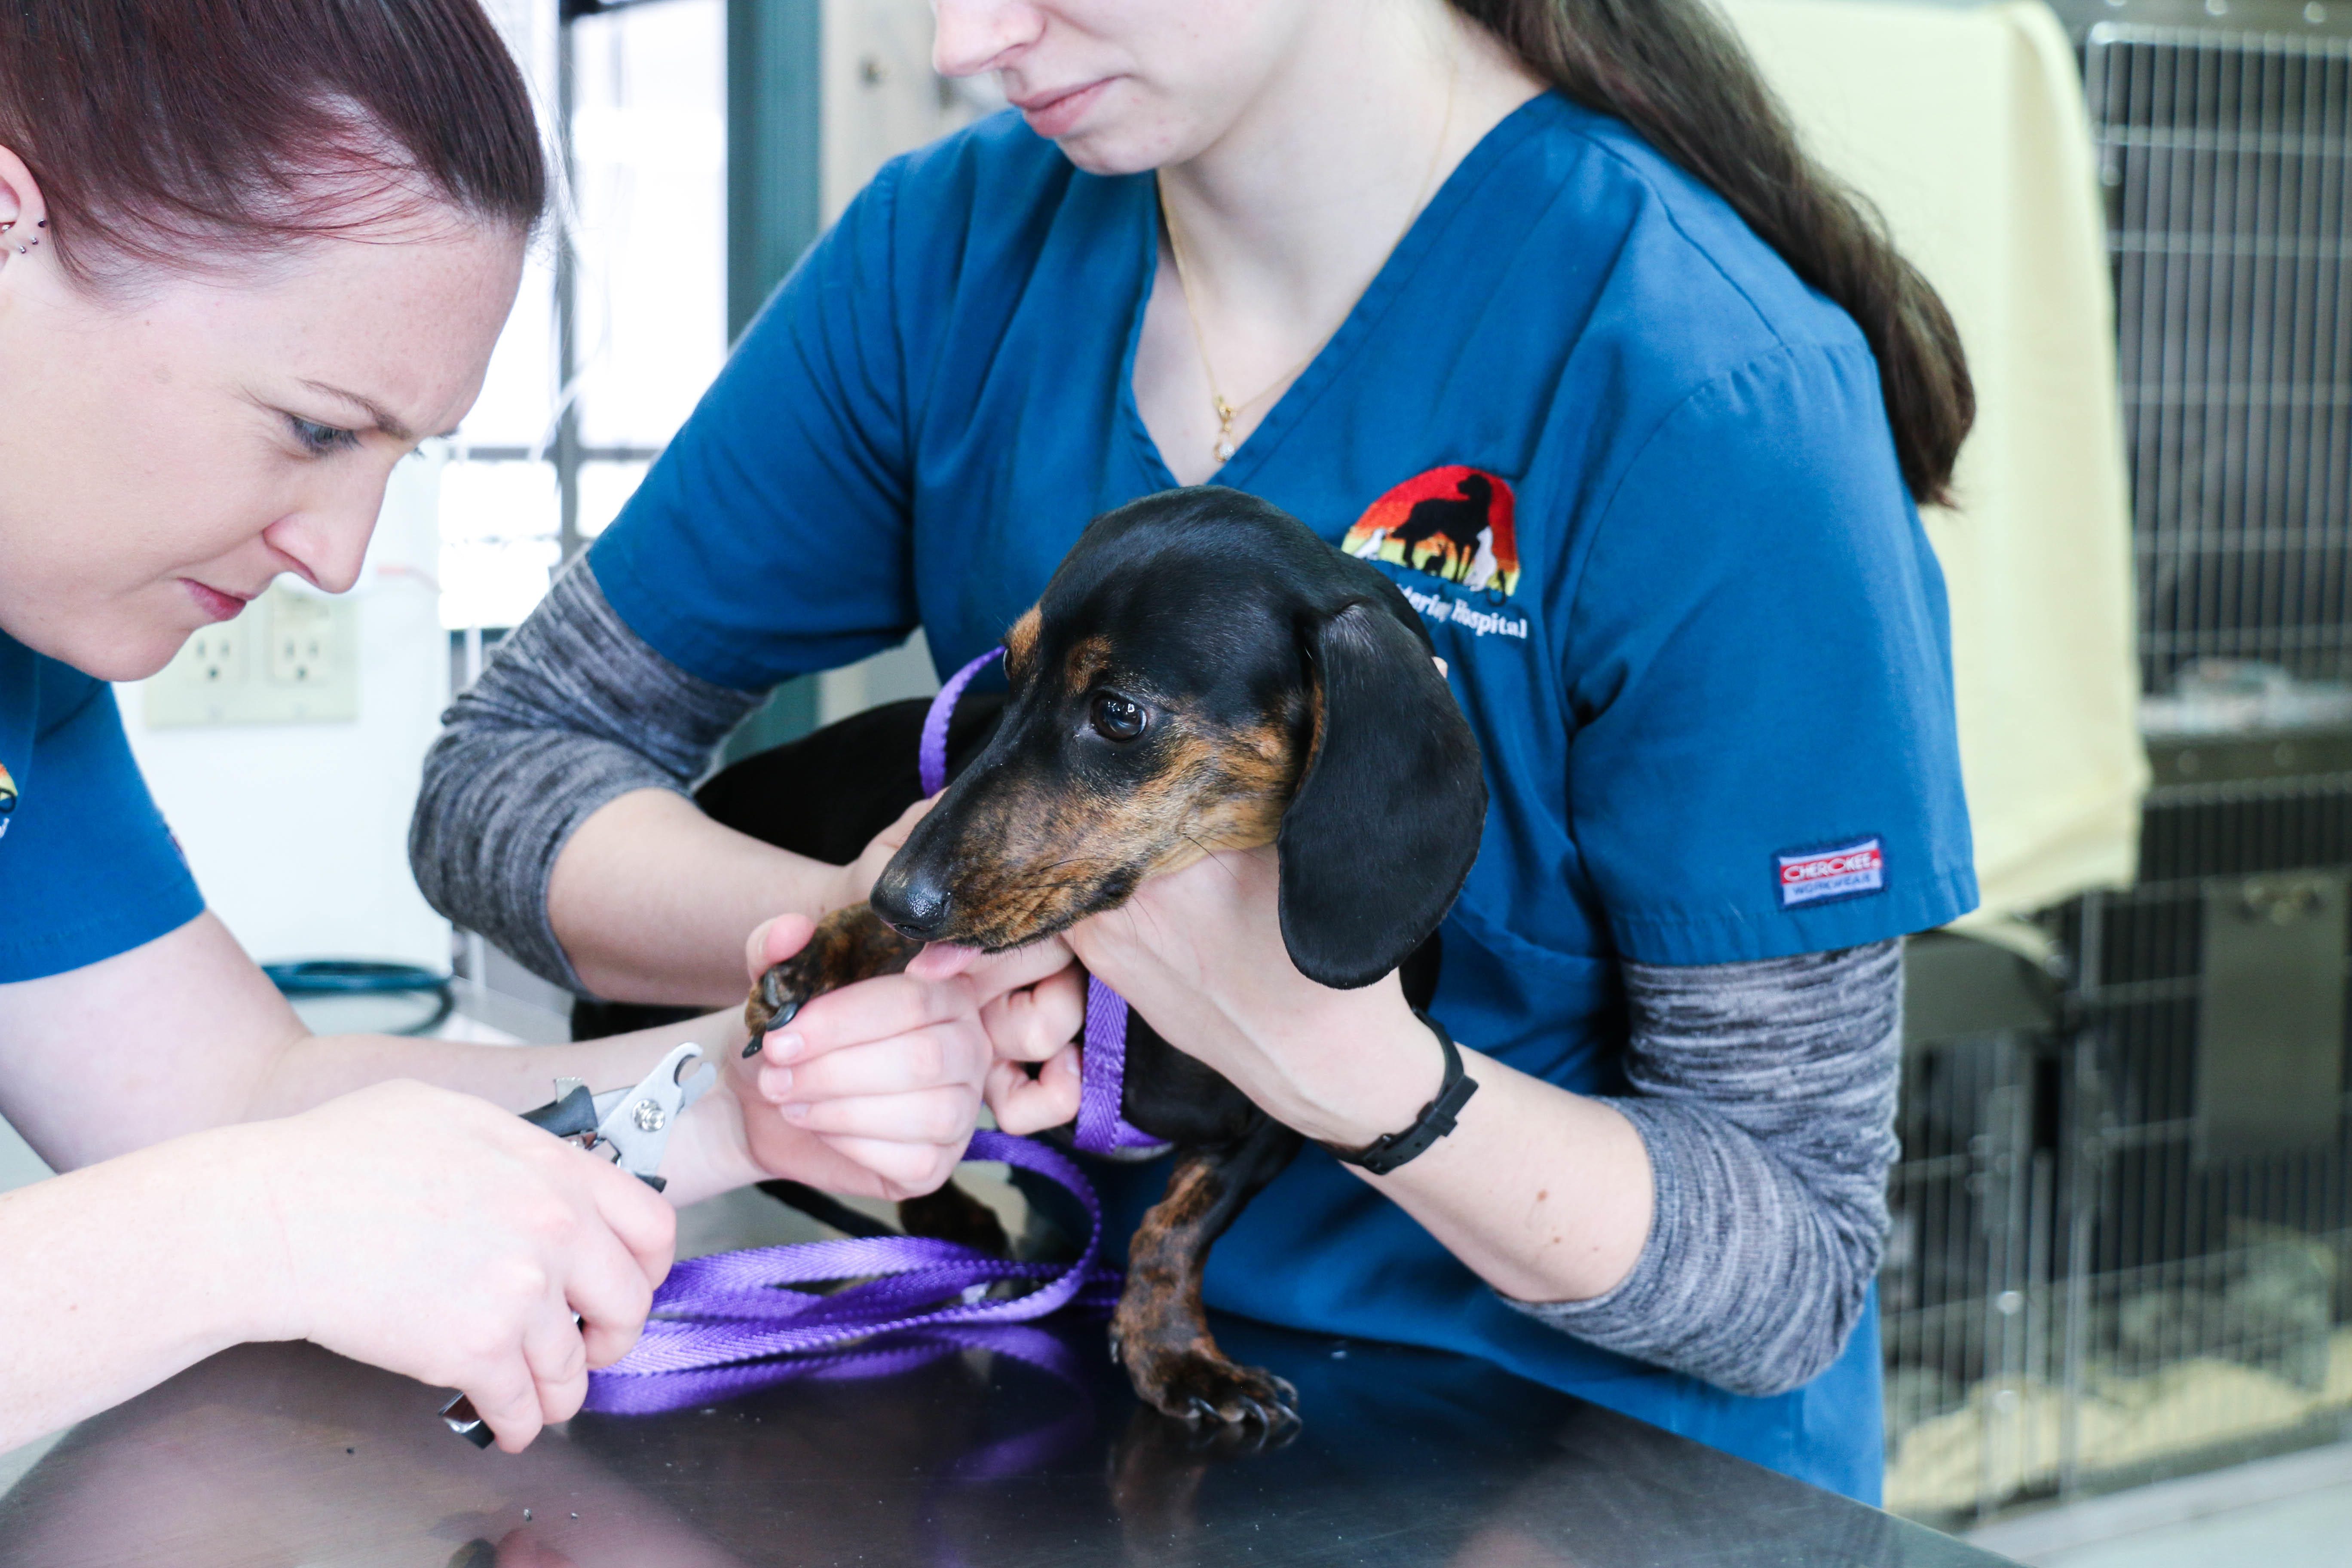 If you struggle to trim your pet’s nails at home, we can help!